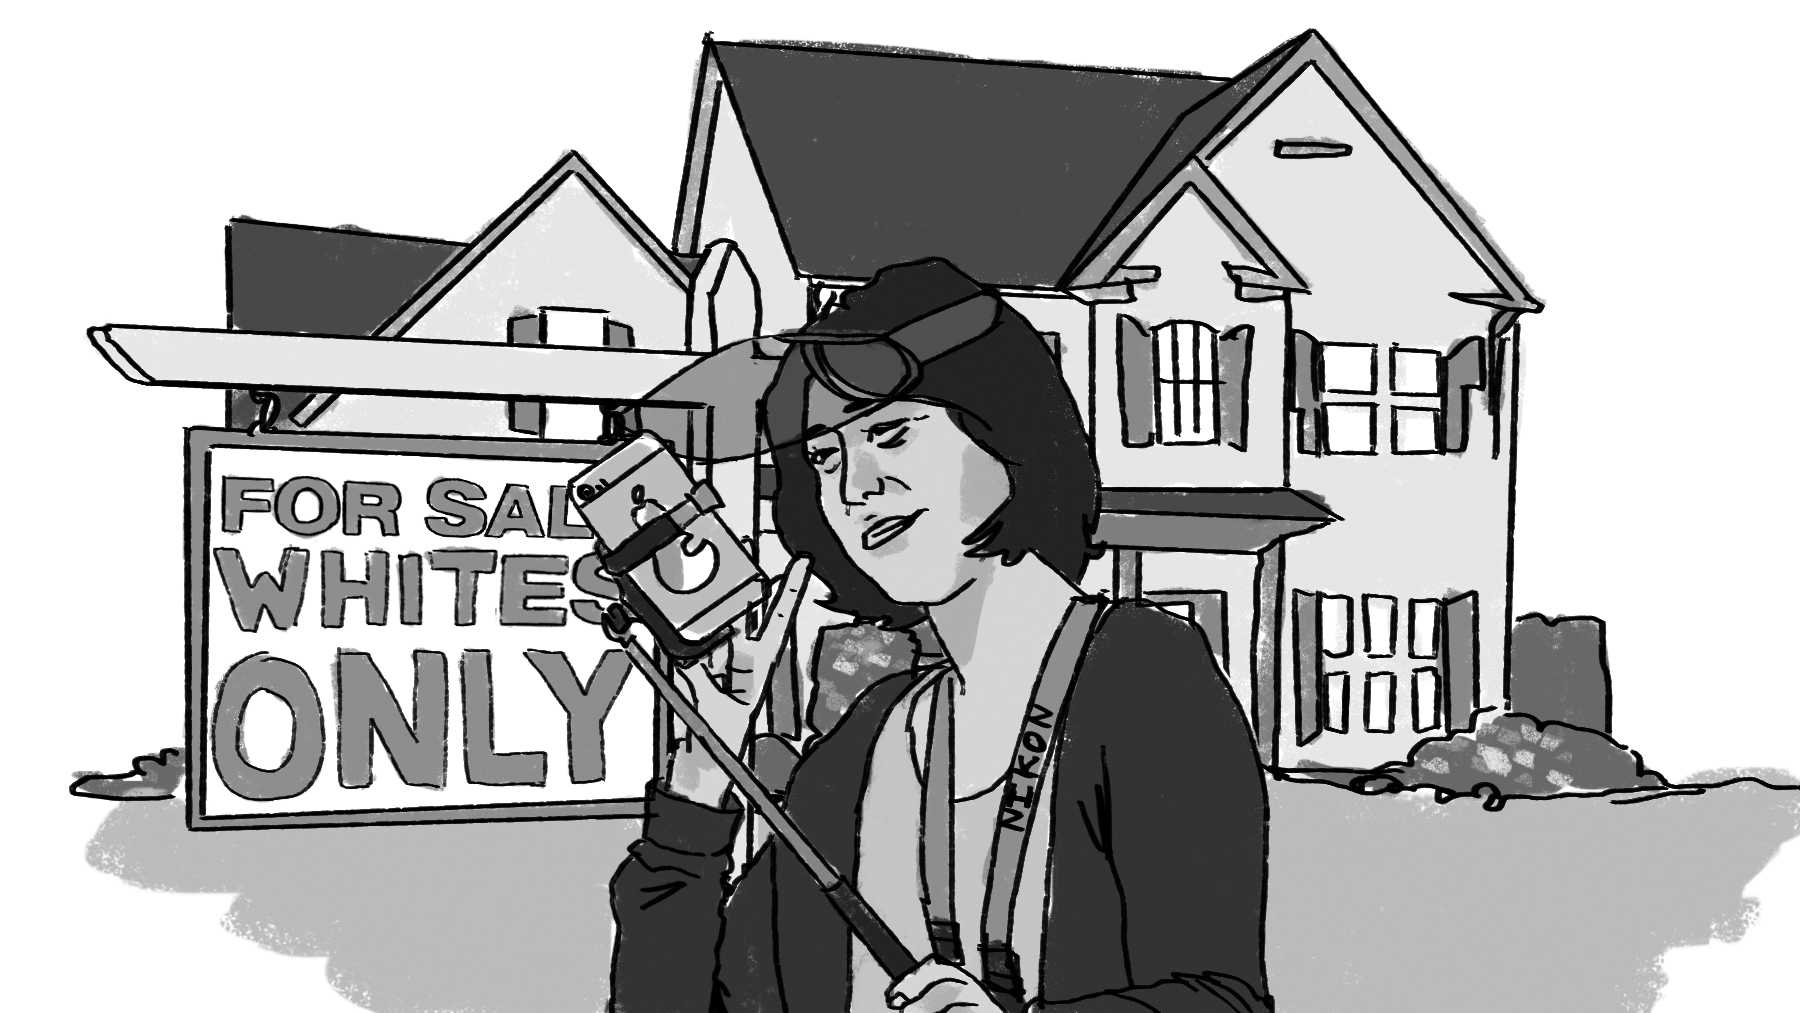 Not For Sale: A history of segregation in Palo Alto